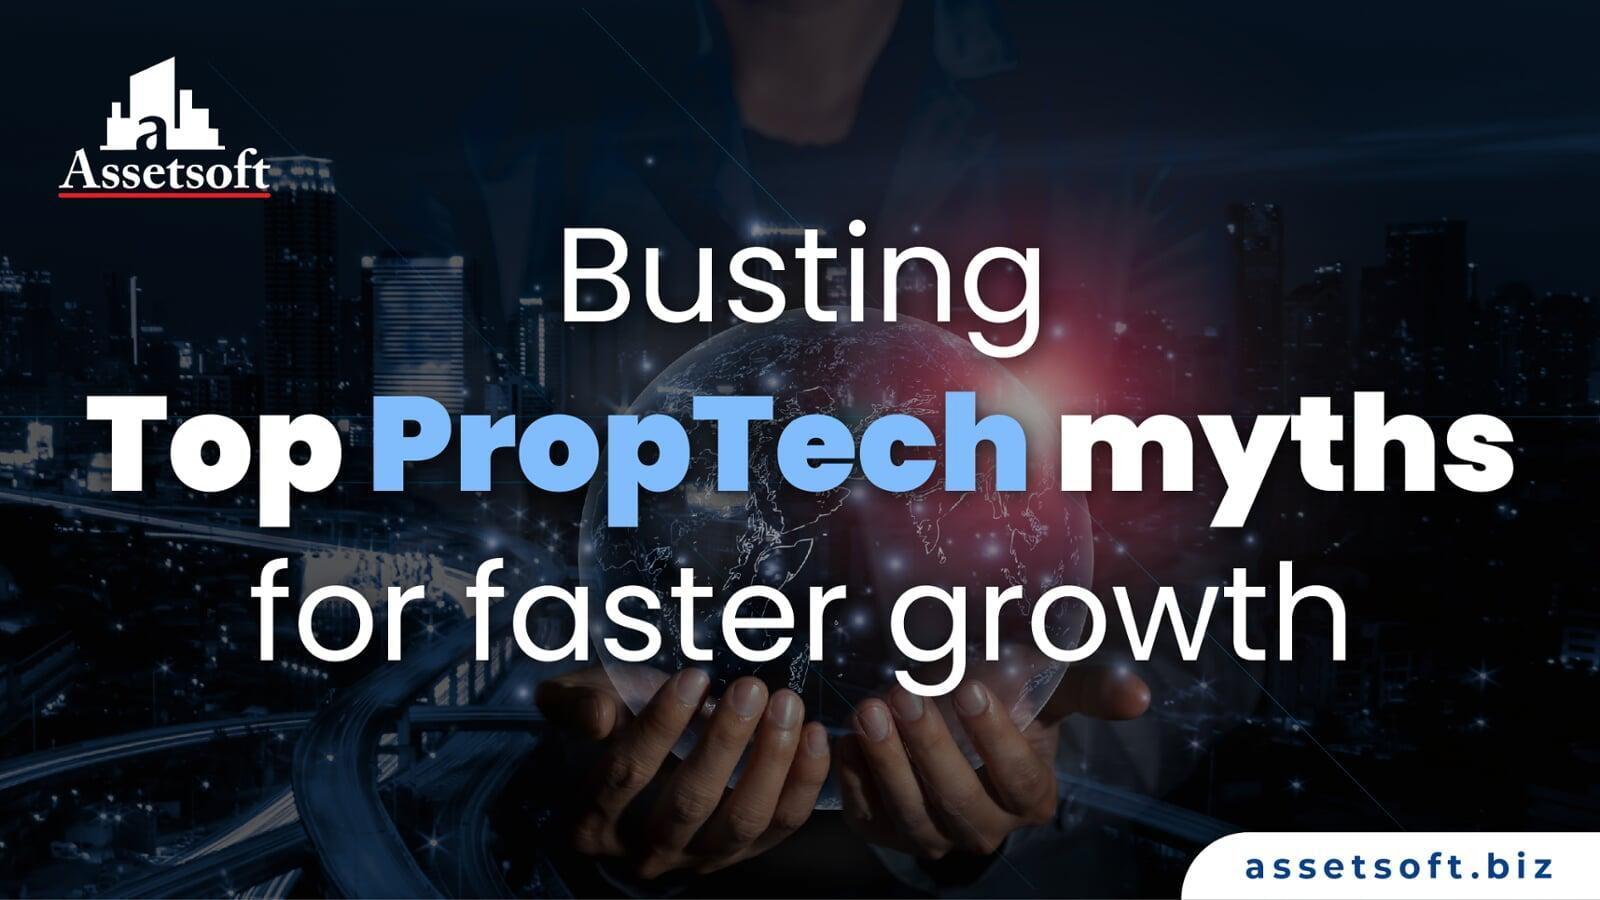 Busting Top PropTech myths for faster growth 